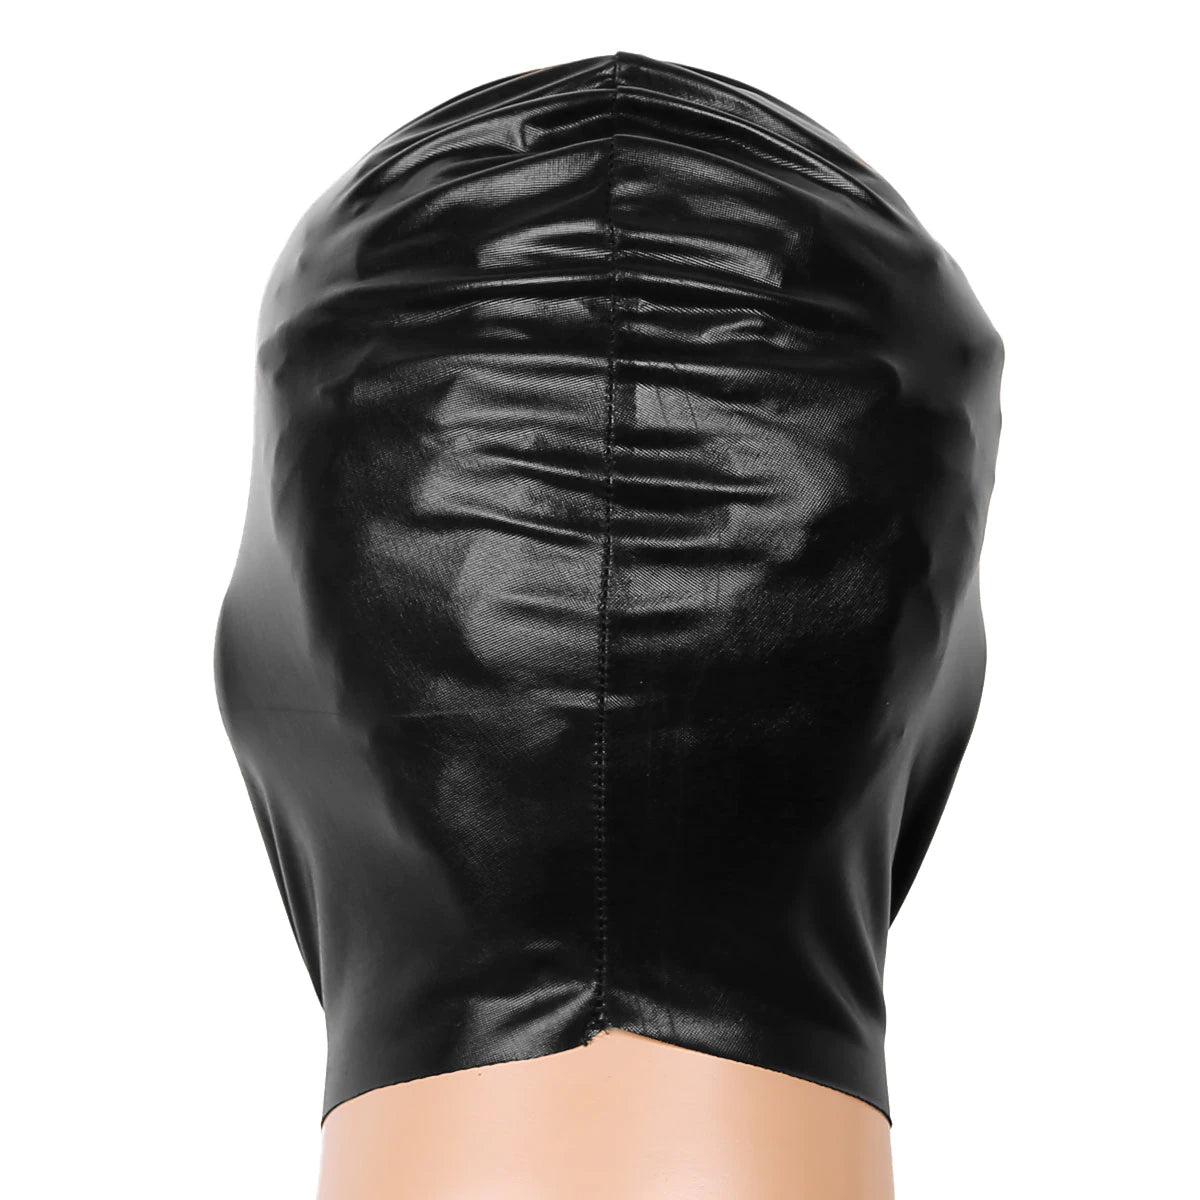 Unisex Latex Mask Open Eyes and Mouth